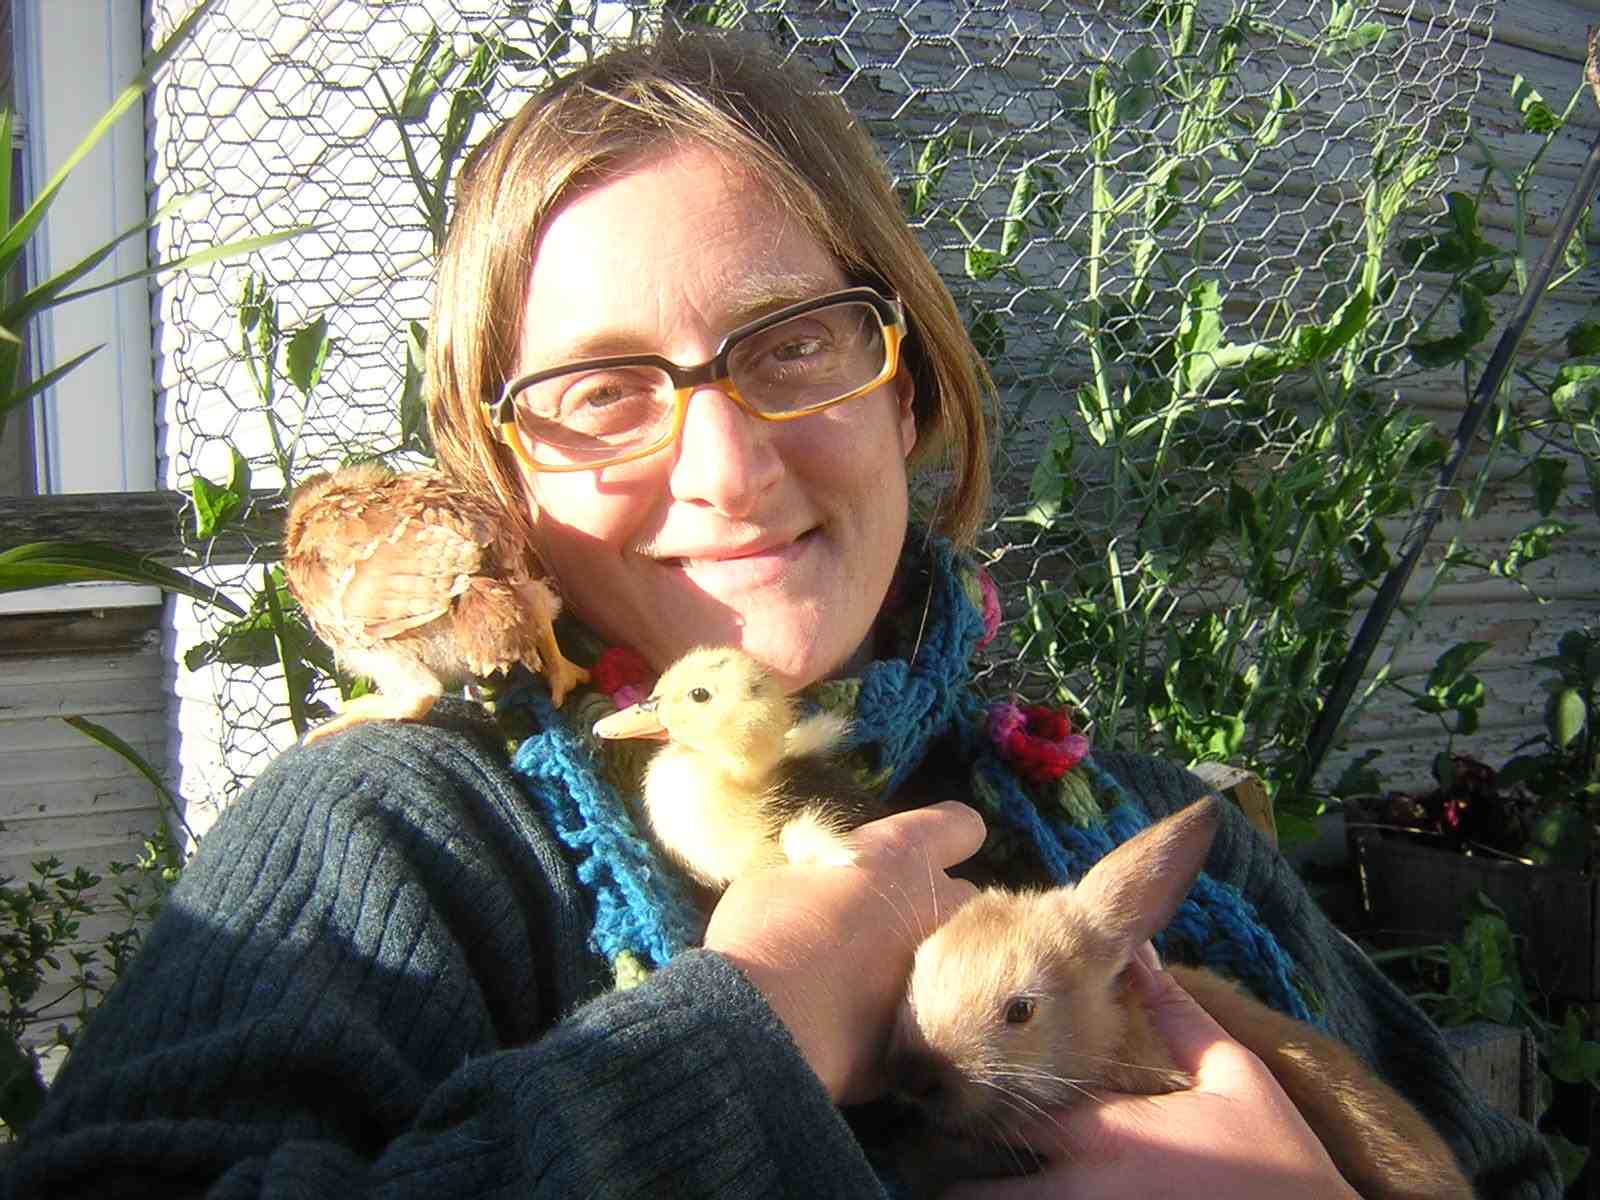 The Habits of an Urban Farmer: an Interview with Novella Carpenter